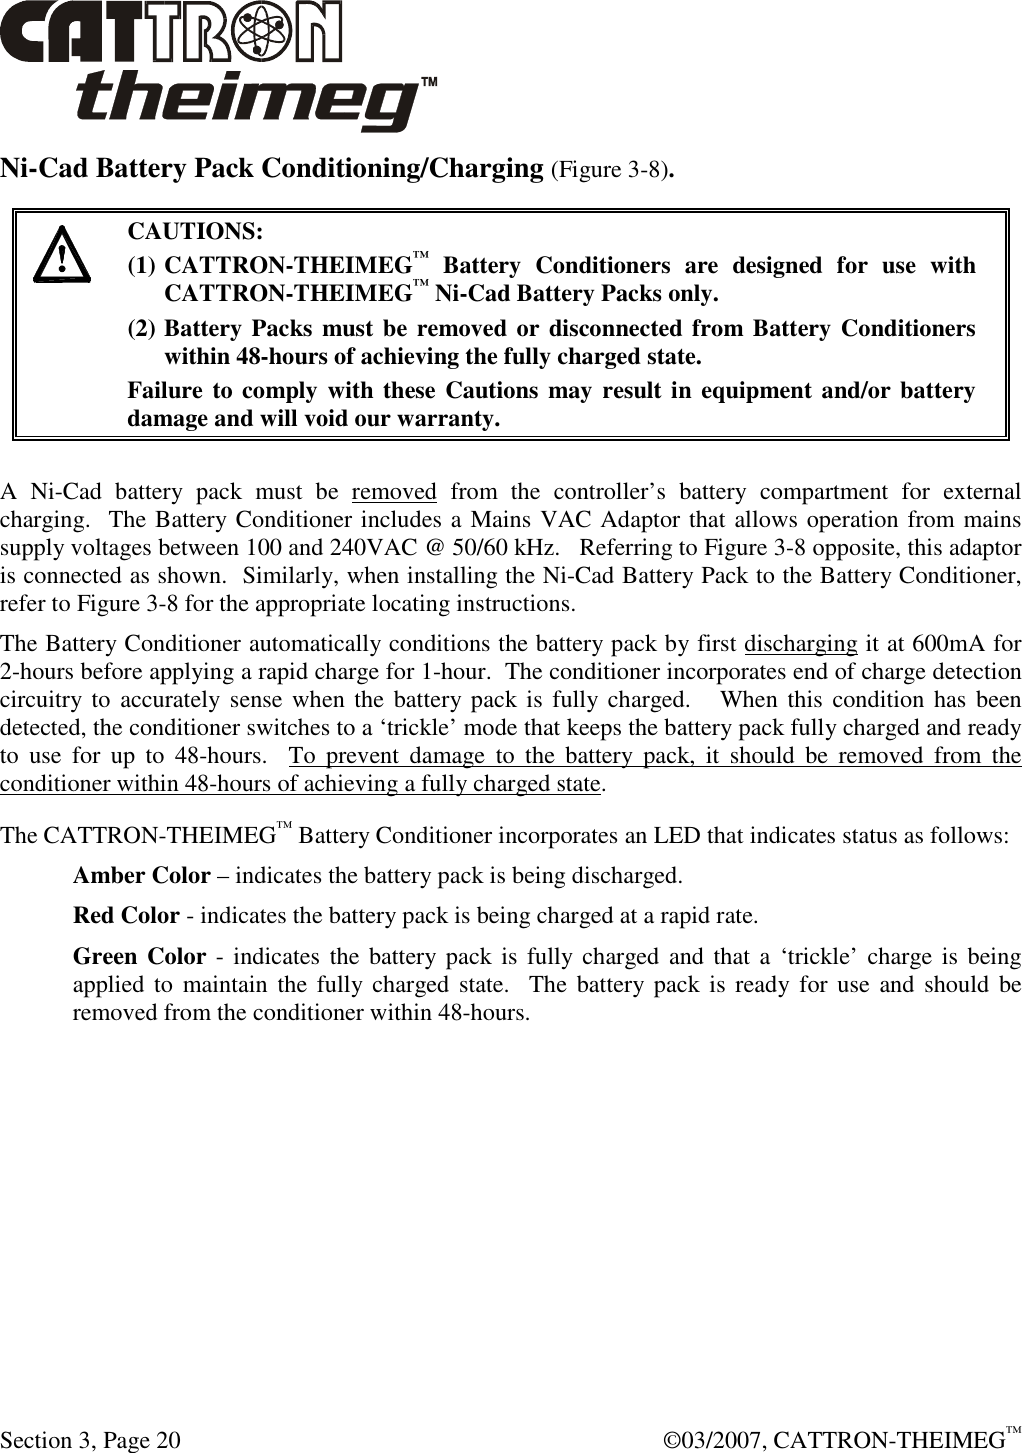  Section 3, Page 20    ©03/2007, CATTRON-THEIMEG™ Ni-Cad Battery Pack Conditioning/Charging (Figure 3-8).   CAUTIONS: (1) CATTRON-THEIMEG™  Battery  Conditioners  are  designed  for  use  with CATTRON-THEIMEG™ Ni-Cad Battery Packs only.   (2) Battery Packs must be removed or disconnected from Battery Conditioners within 48-hours of achieving the fully charged state.   Failure to comply with these Cautions  may result in equipment and/or battery damage and will void our warranty.   A  Ni-Cad  battery  pack  must  be  removed  from  the  controller’s  battery  compartment  for  external charging.  The Battery Conditioner includes a Mains VAC Adaptor that allows operation from mains supply voltages between 100 and 240VAC @ 50/60 kHz.   Referring to Figure 3-8 opposite, this adaptor is connected as shown.  Similarly, when installing the Ni-Cad Battery Pack to the Battery Conditioner, refer to Figure 3-8 for the appropriate locating instructions.  The Battery Conditioner automatically conditions the battery pack by first discharging it at 600mA for 2-hours before applying a rapid charge for 1-hour.  The conditioner incorporates end of charge detection circuitry to  accurately sense when  the battery pack is fully  charged.    When this  condition  has been detected, the conditioner switches to a ‘trickle’ mode that keeps the battery pack fully charged and ready to  use  for  up  to  48-hours.    To  prevent  damage  to  the  battery  pack,  it  should  be  removed  from  the conditioner within 48-hours of achieving a fully charged state. The CATTRON-THEIMEG™ Battery Conditioner incorporates an LED that indicates status as follows: Amber Color – indicates the battery pack is being discharged. Red Color - indicates the battery pack is being charged at a rapid rate. Green Color - indicates the battery pack is fully  charged and  that a  ‘trickle’ charge is  being applied to maintain  the fully charged  state.  The  battery pack is  ready  for use and  should  be removed from the conditioner within 48-hours. 